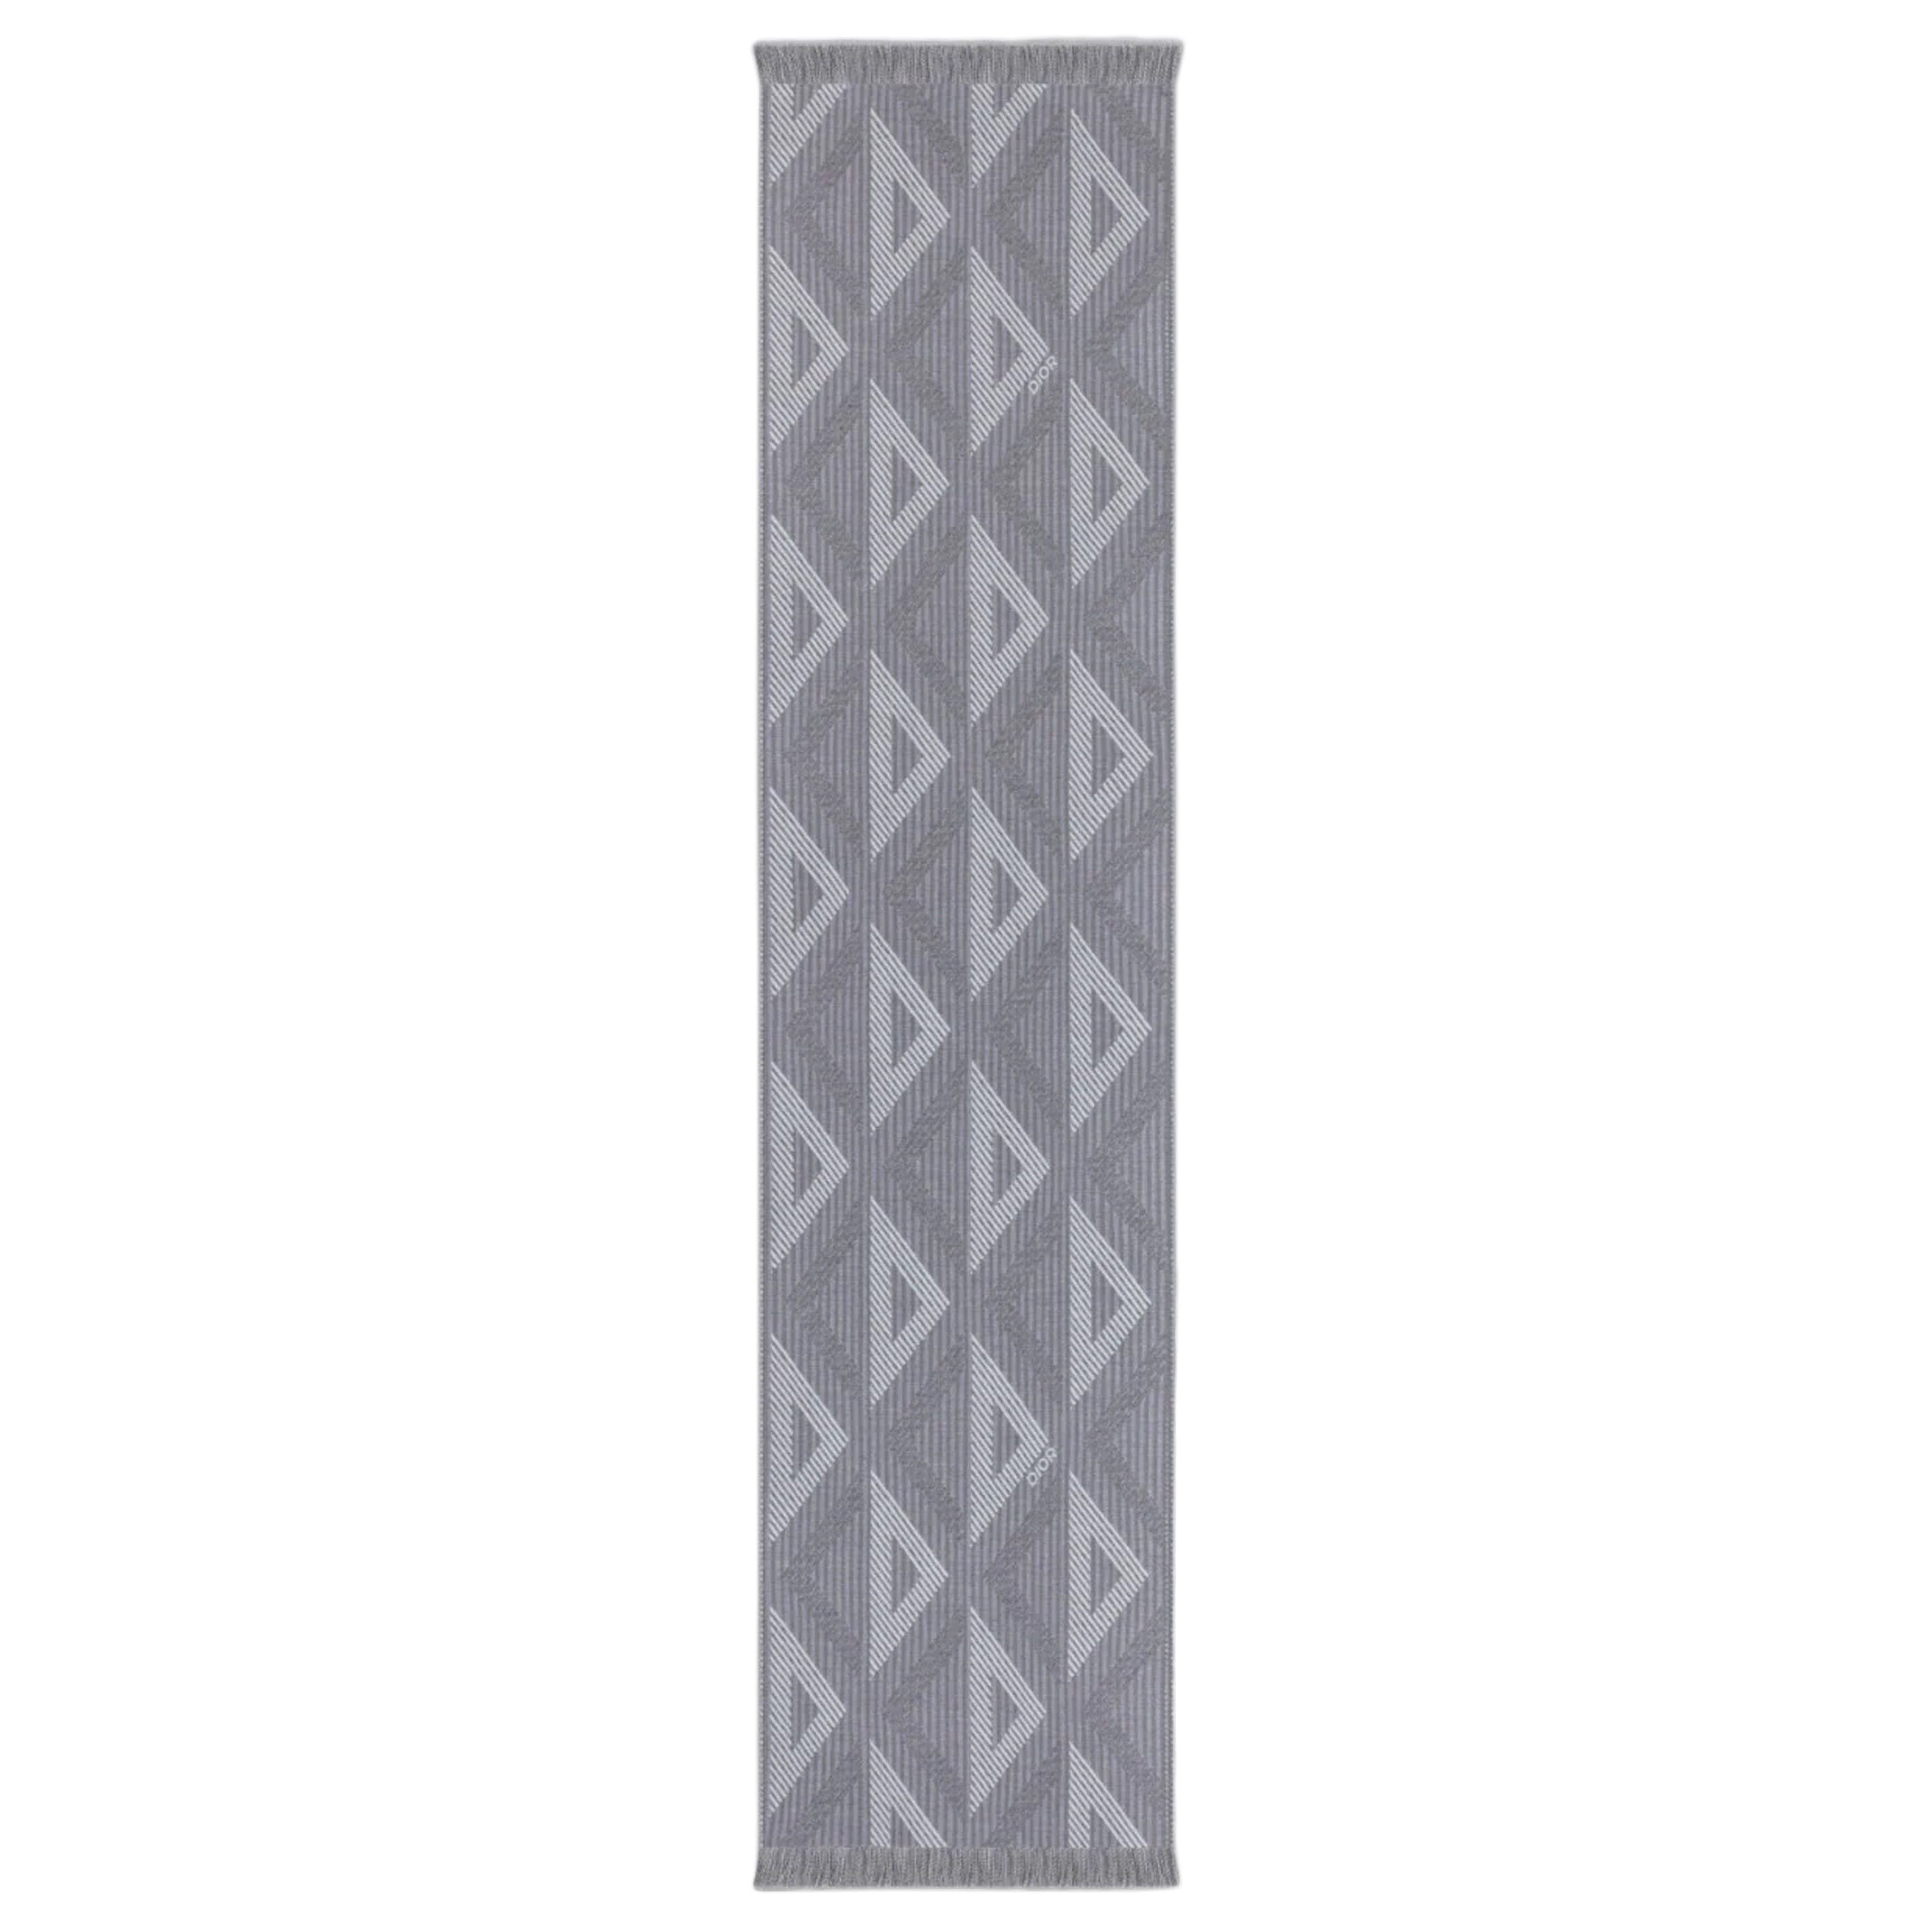 Grey Stripe/Triangle Patterened Fringed Scarf Accessories Christian Dior